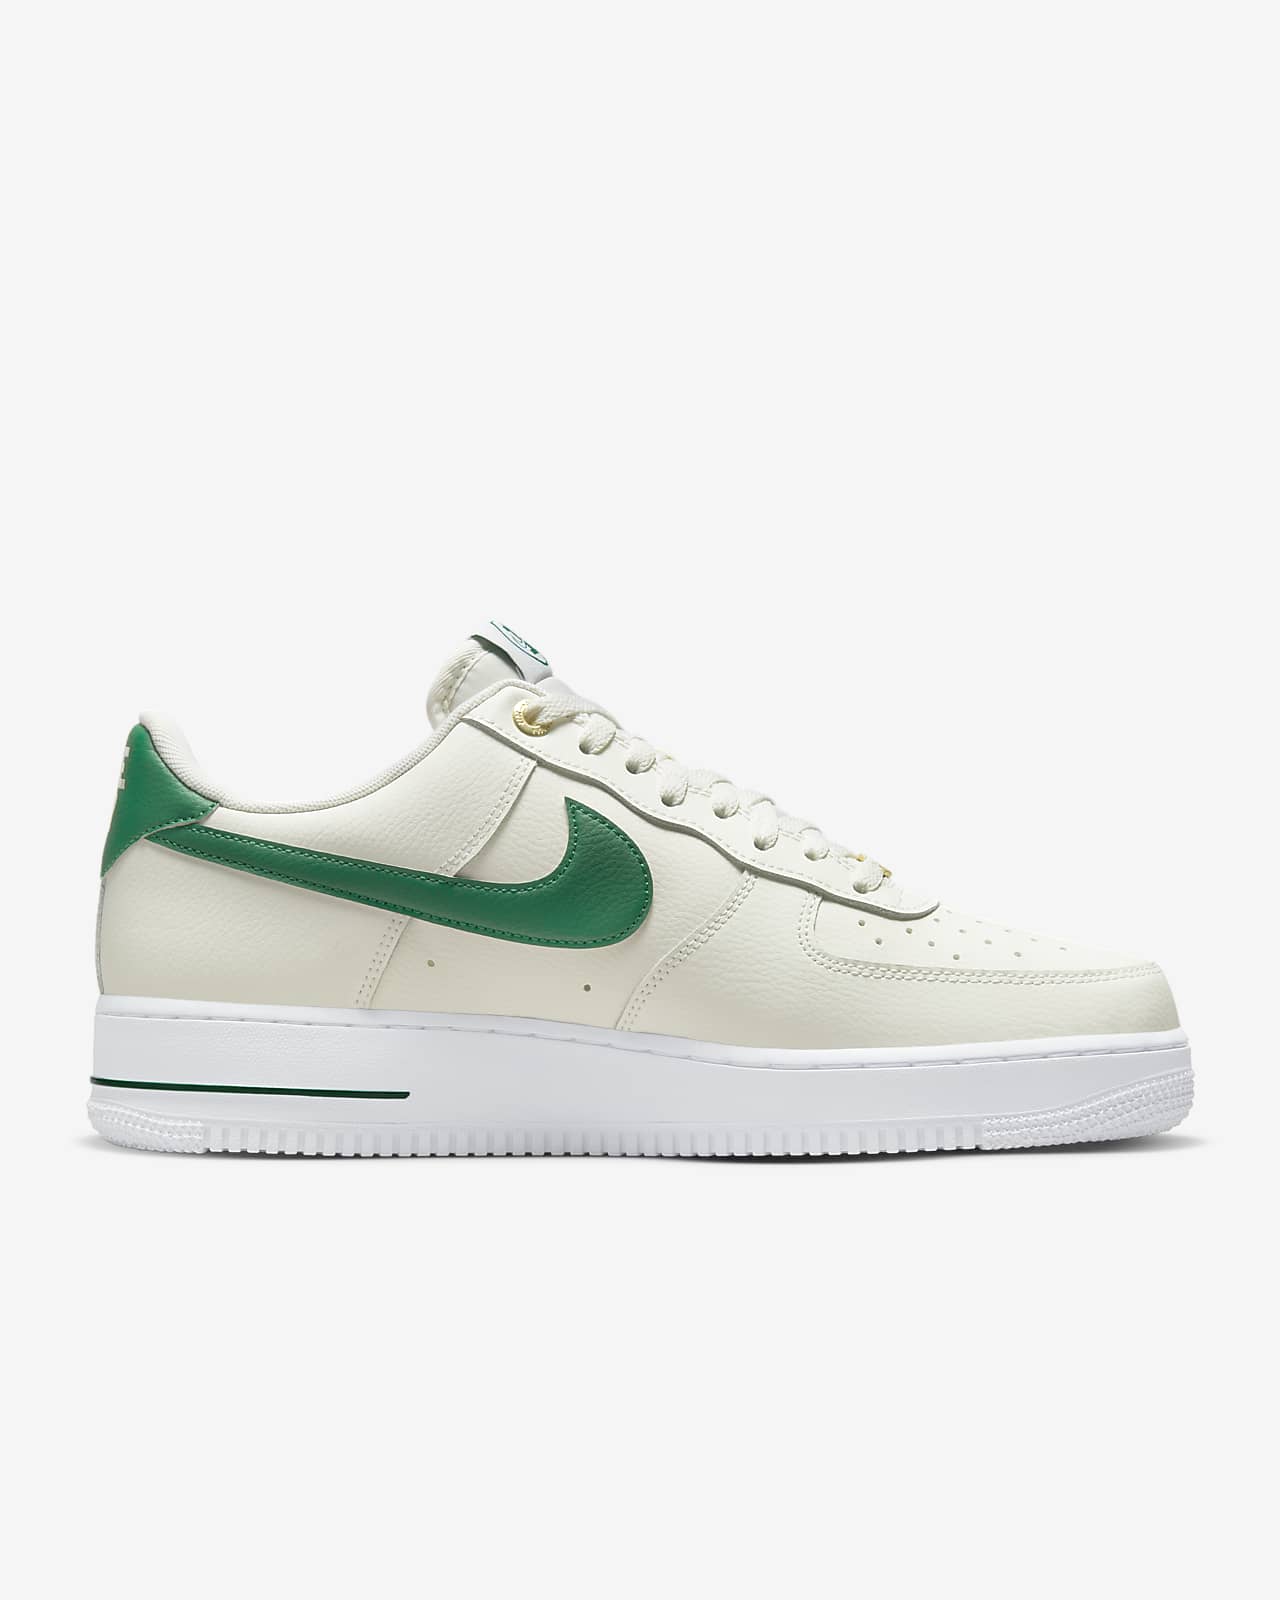 Nike Air Force 1 '07 LV8 Men's Casual Shoes